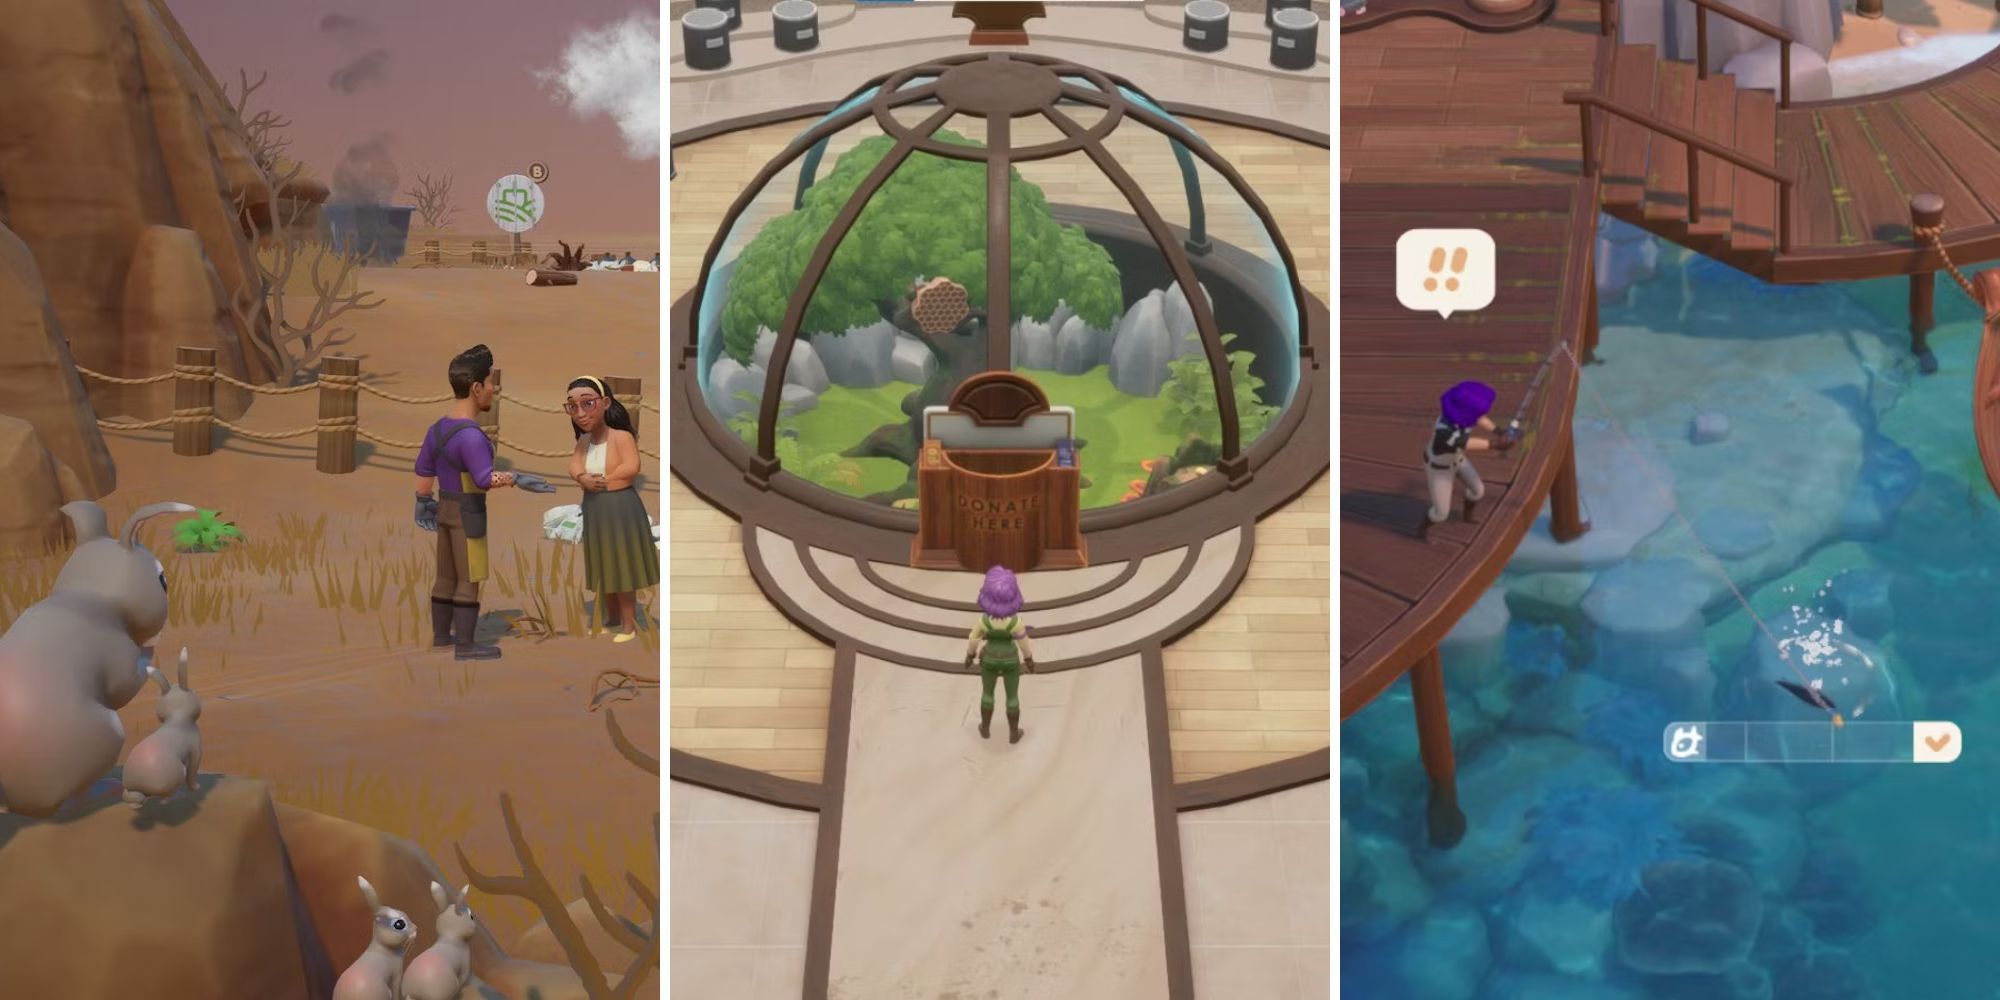 A grid of images showing three different activities in Coral Island